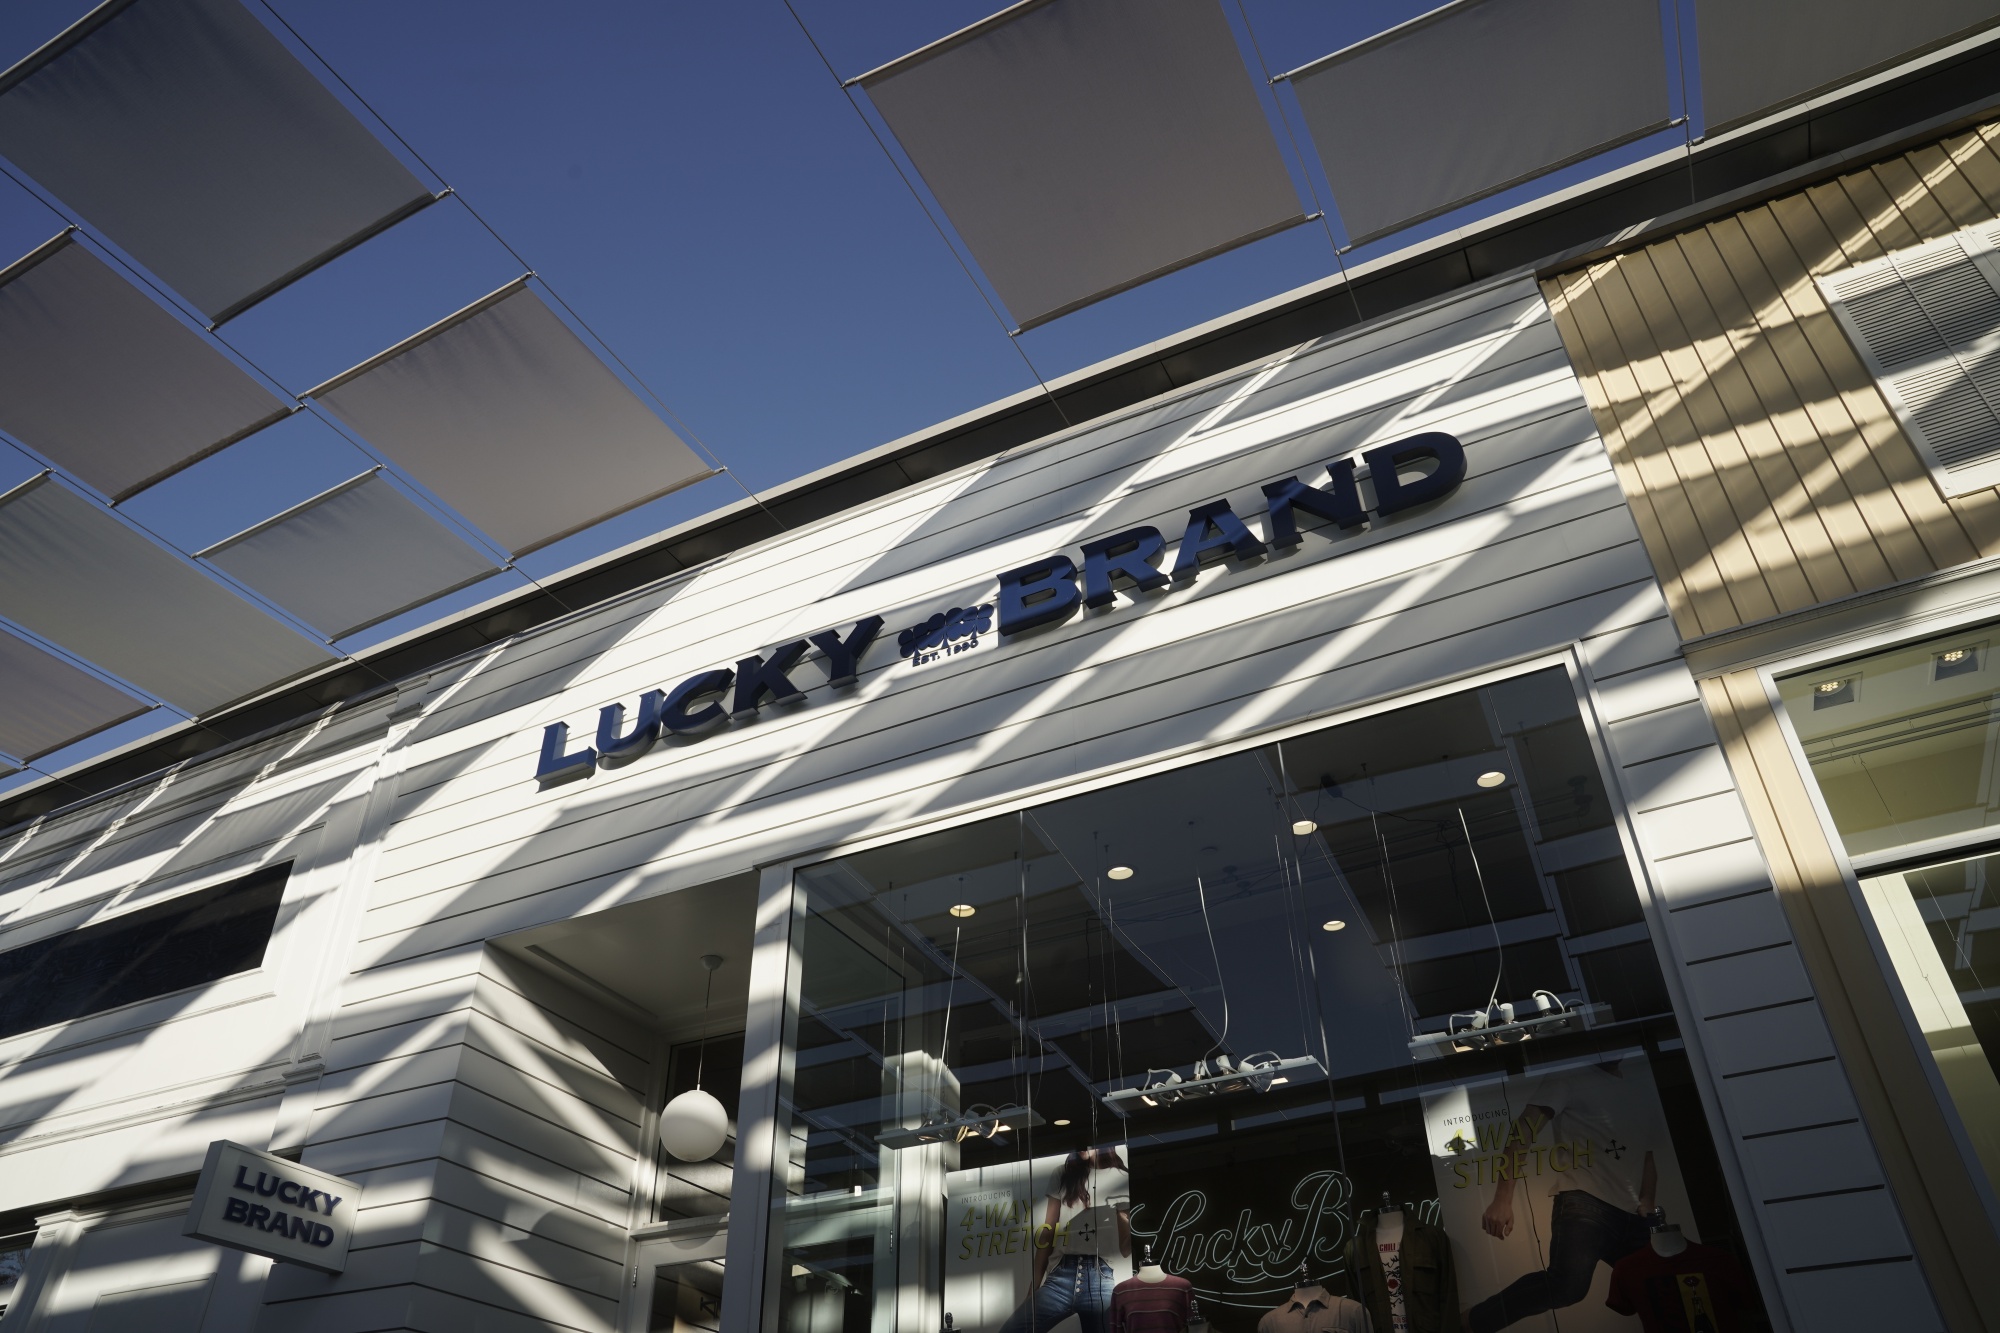 Lucky Brand Files for Bankruptcy After Pandemic Forces Closures